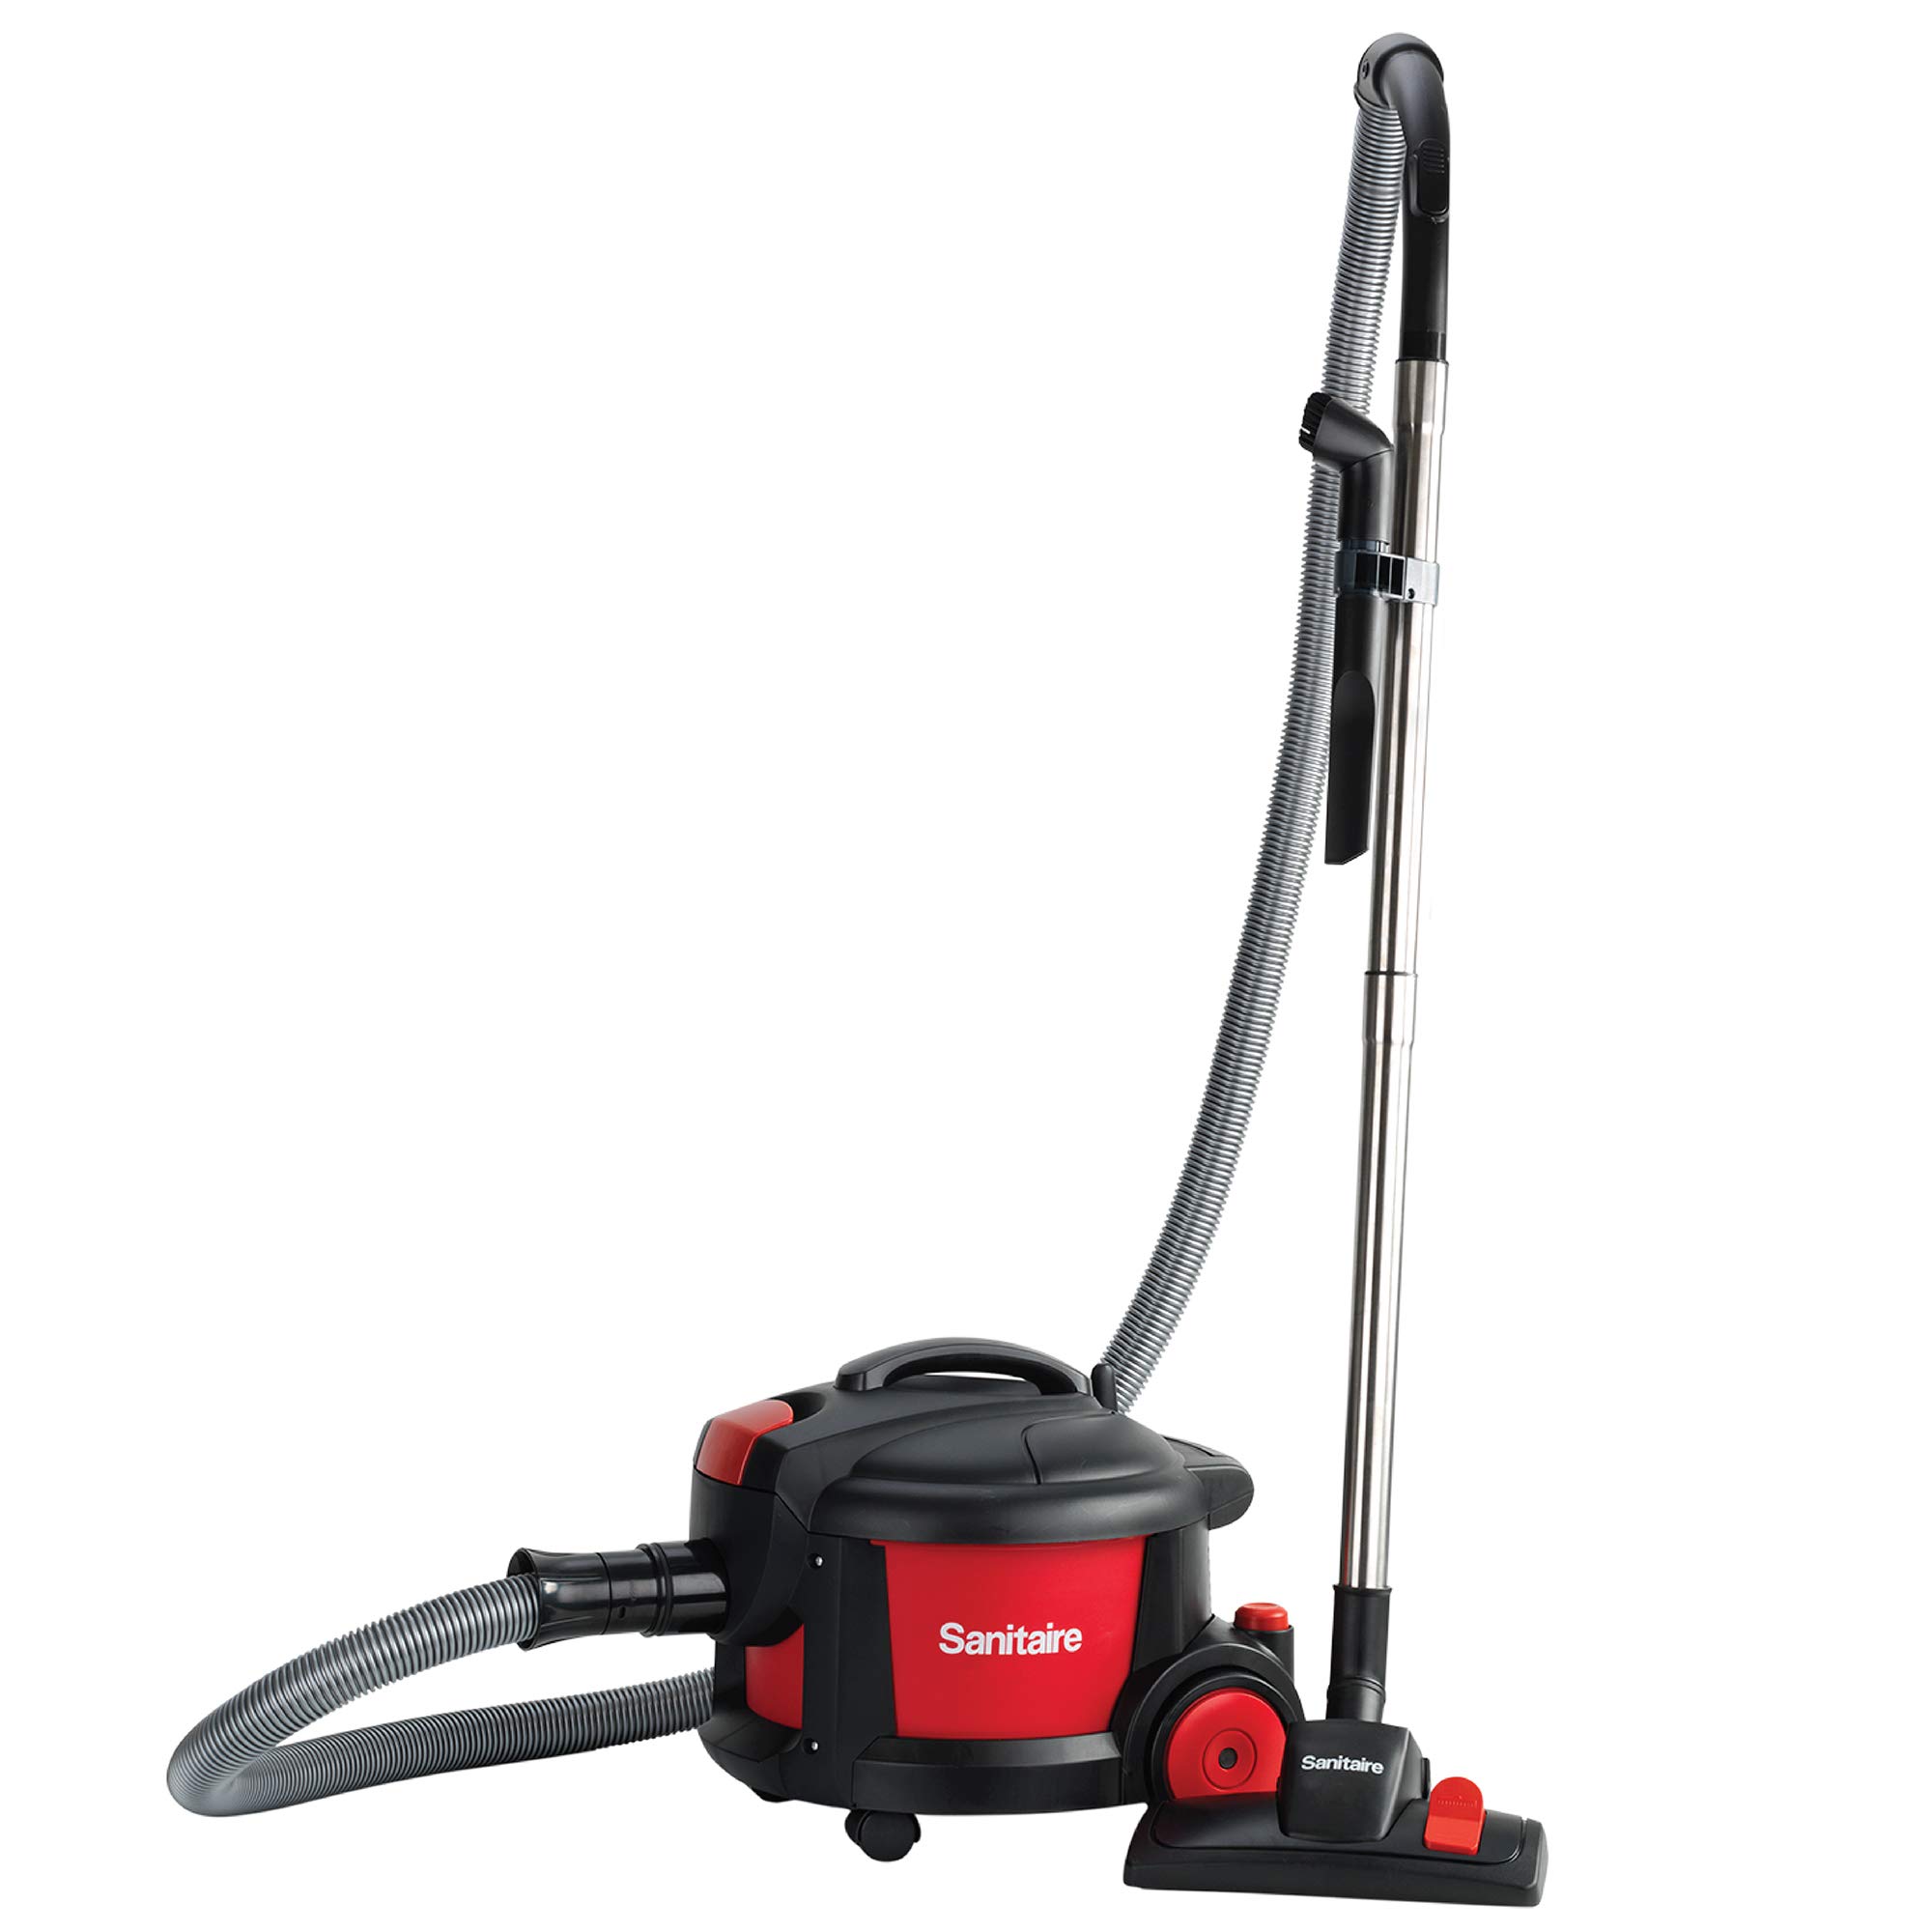 Sanitaire SC3700A Quiet Clean Canister Vacuum, Red/Black, 9.0 Amp, 11